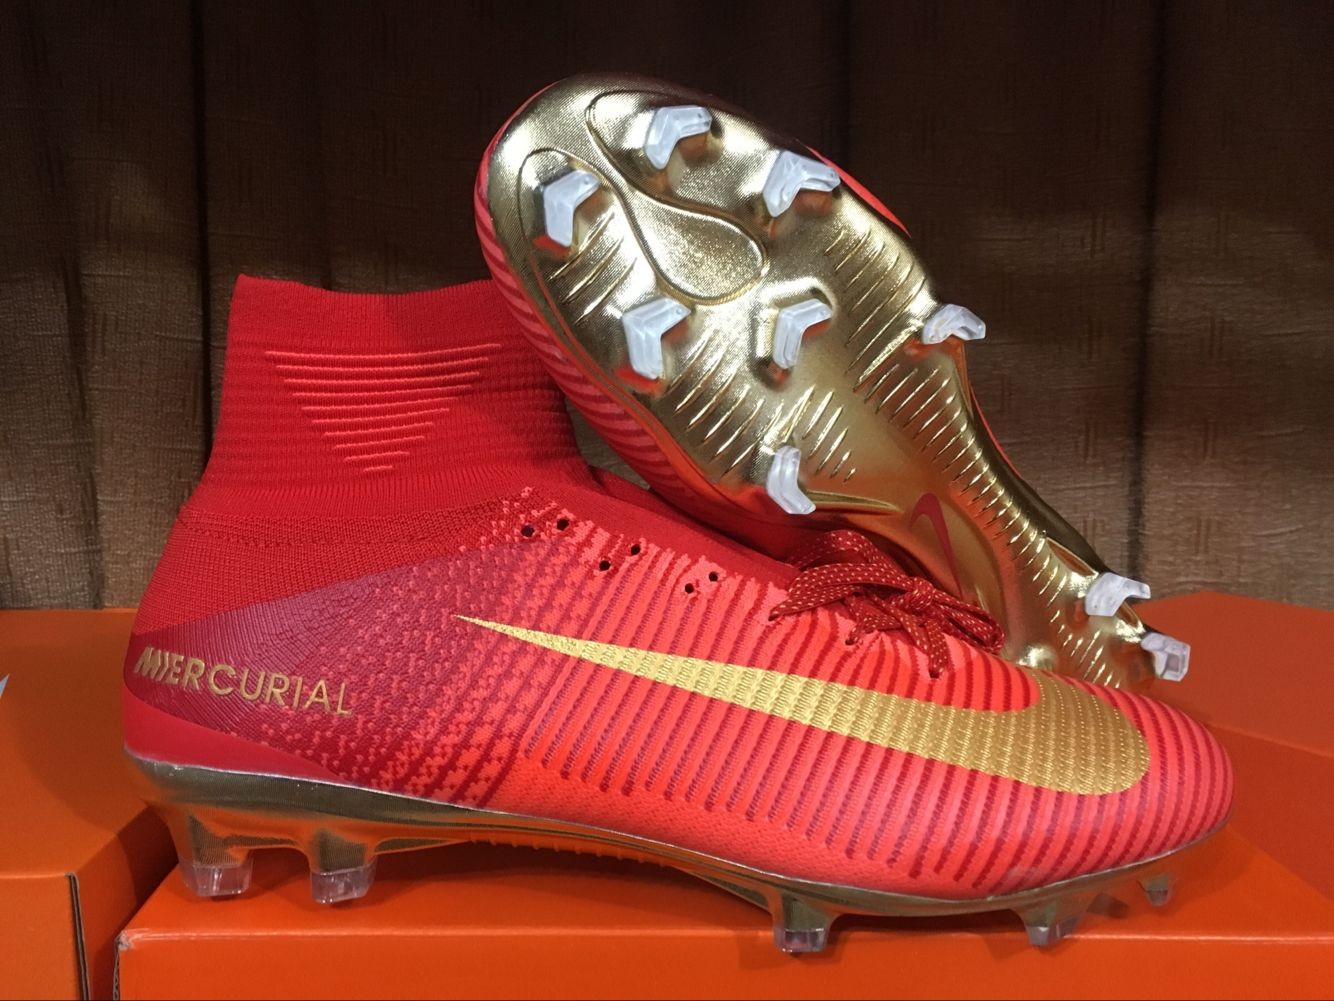 Portugal Nike Mercurial Superfly V Cr7 - Red / Gold